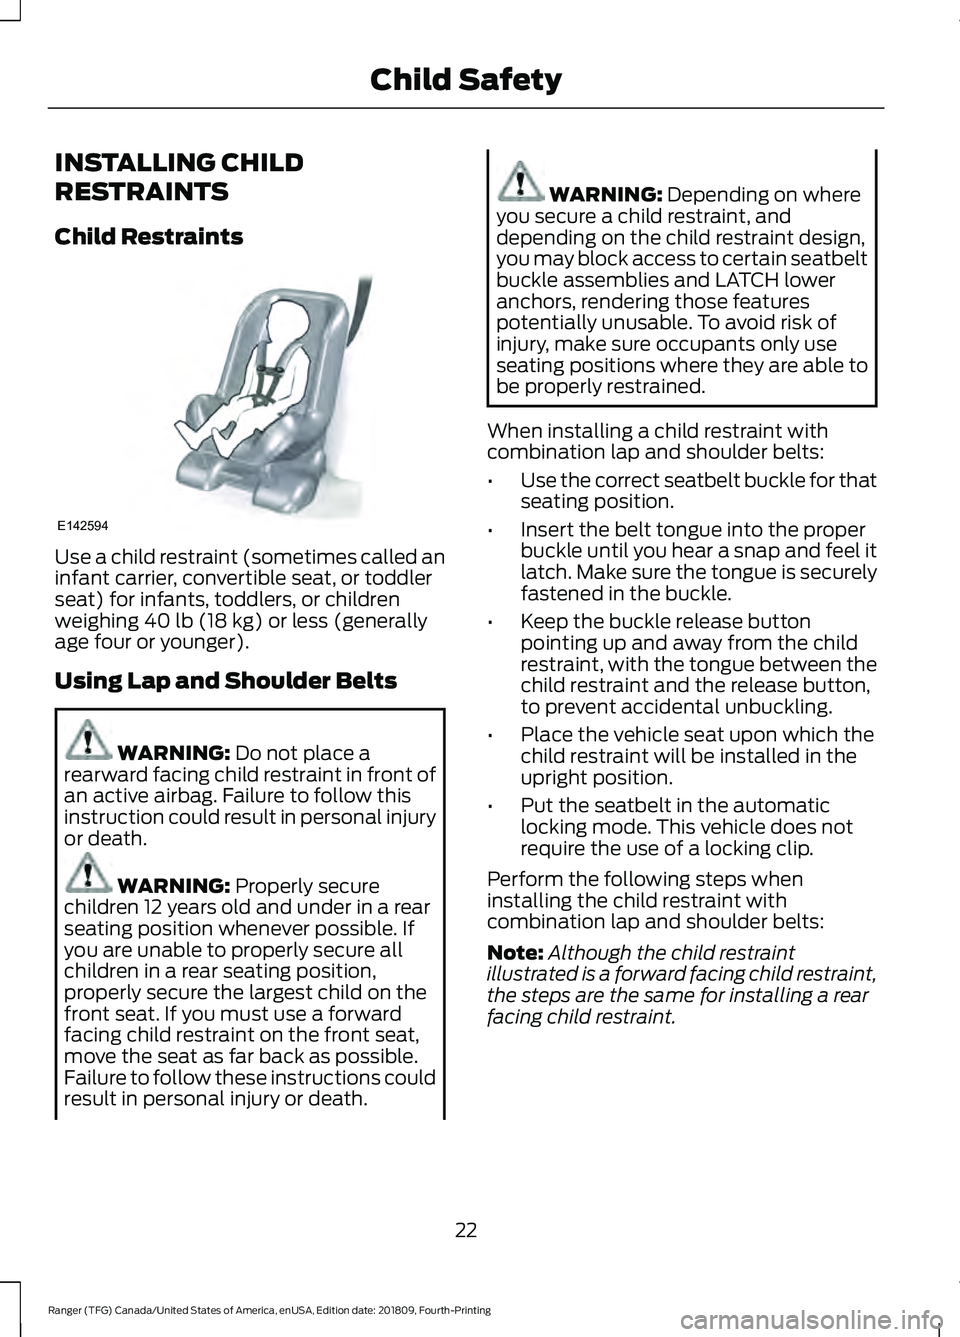 FORD RANGER 2019  Owners Manual INSTALLING CHILD
RESTRAINTS
Child Restraints
Use a child restraint (sometimes called an
infant carrier, convertible seat, or toddler
seat) for infants, toddlers, or children
weighing 40 lb (18 kg) or 